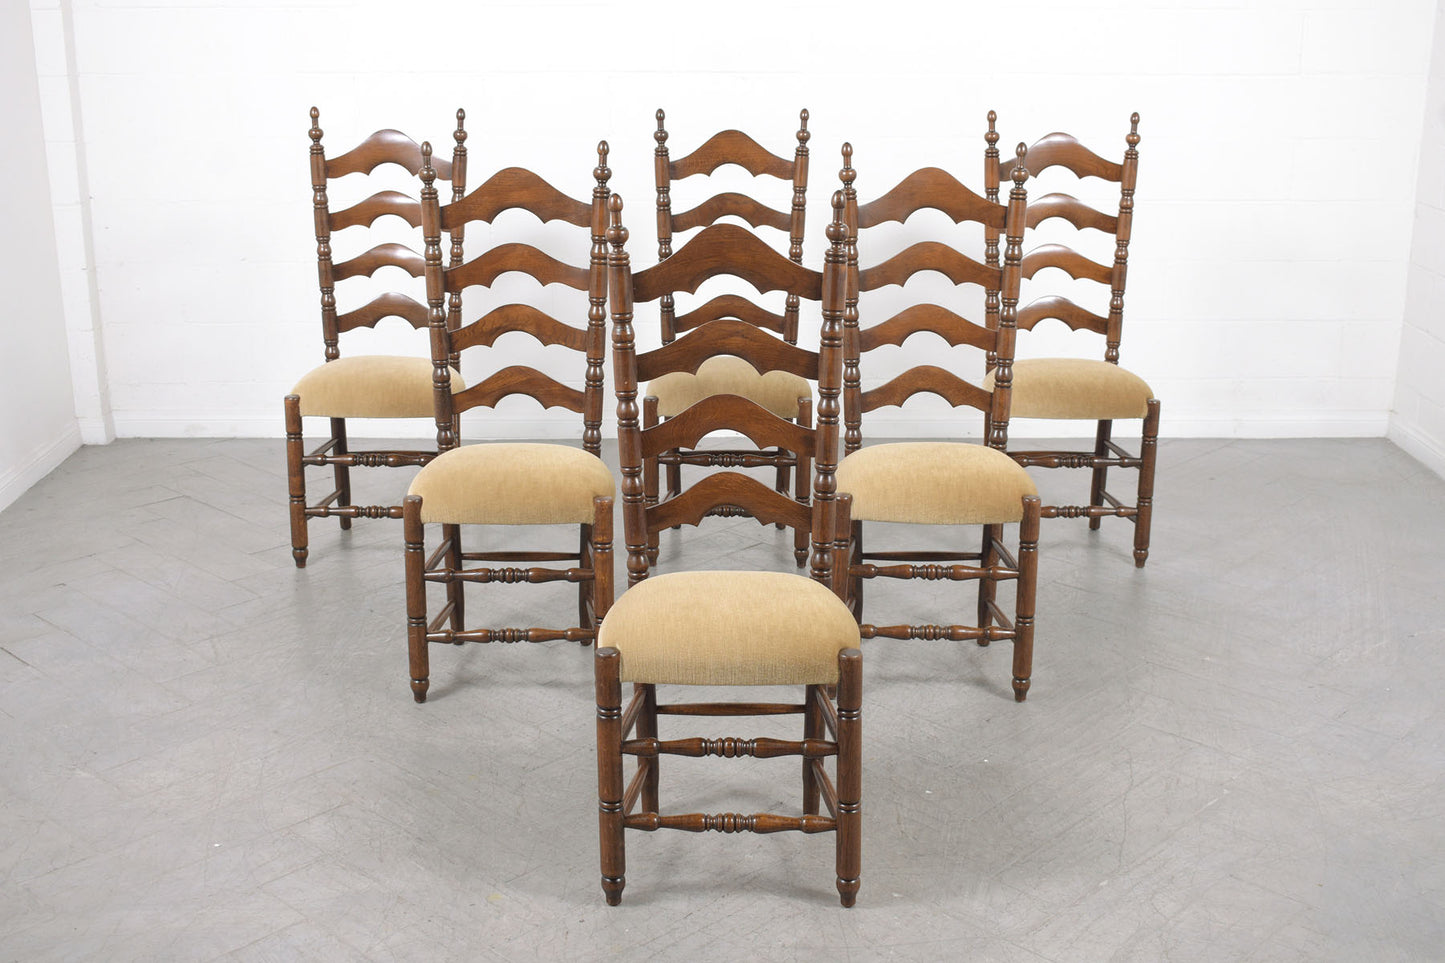 Vintage French Provincial Dining Chairs - Hand-Crafted 1900s Upholstery Set